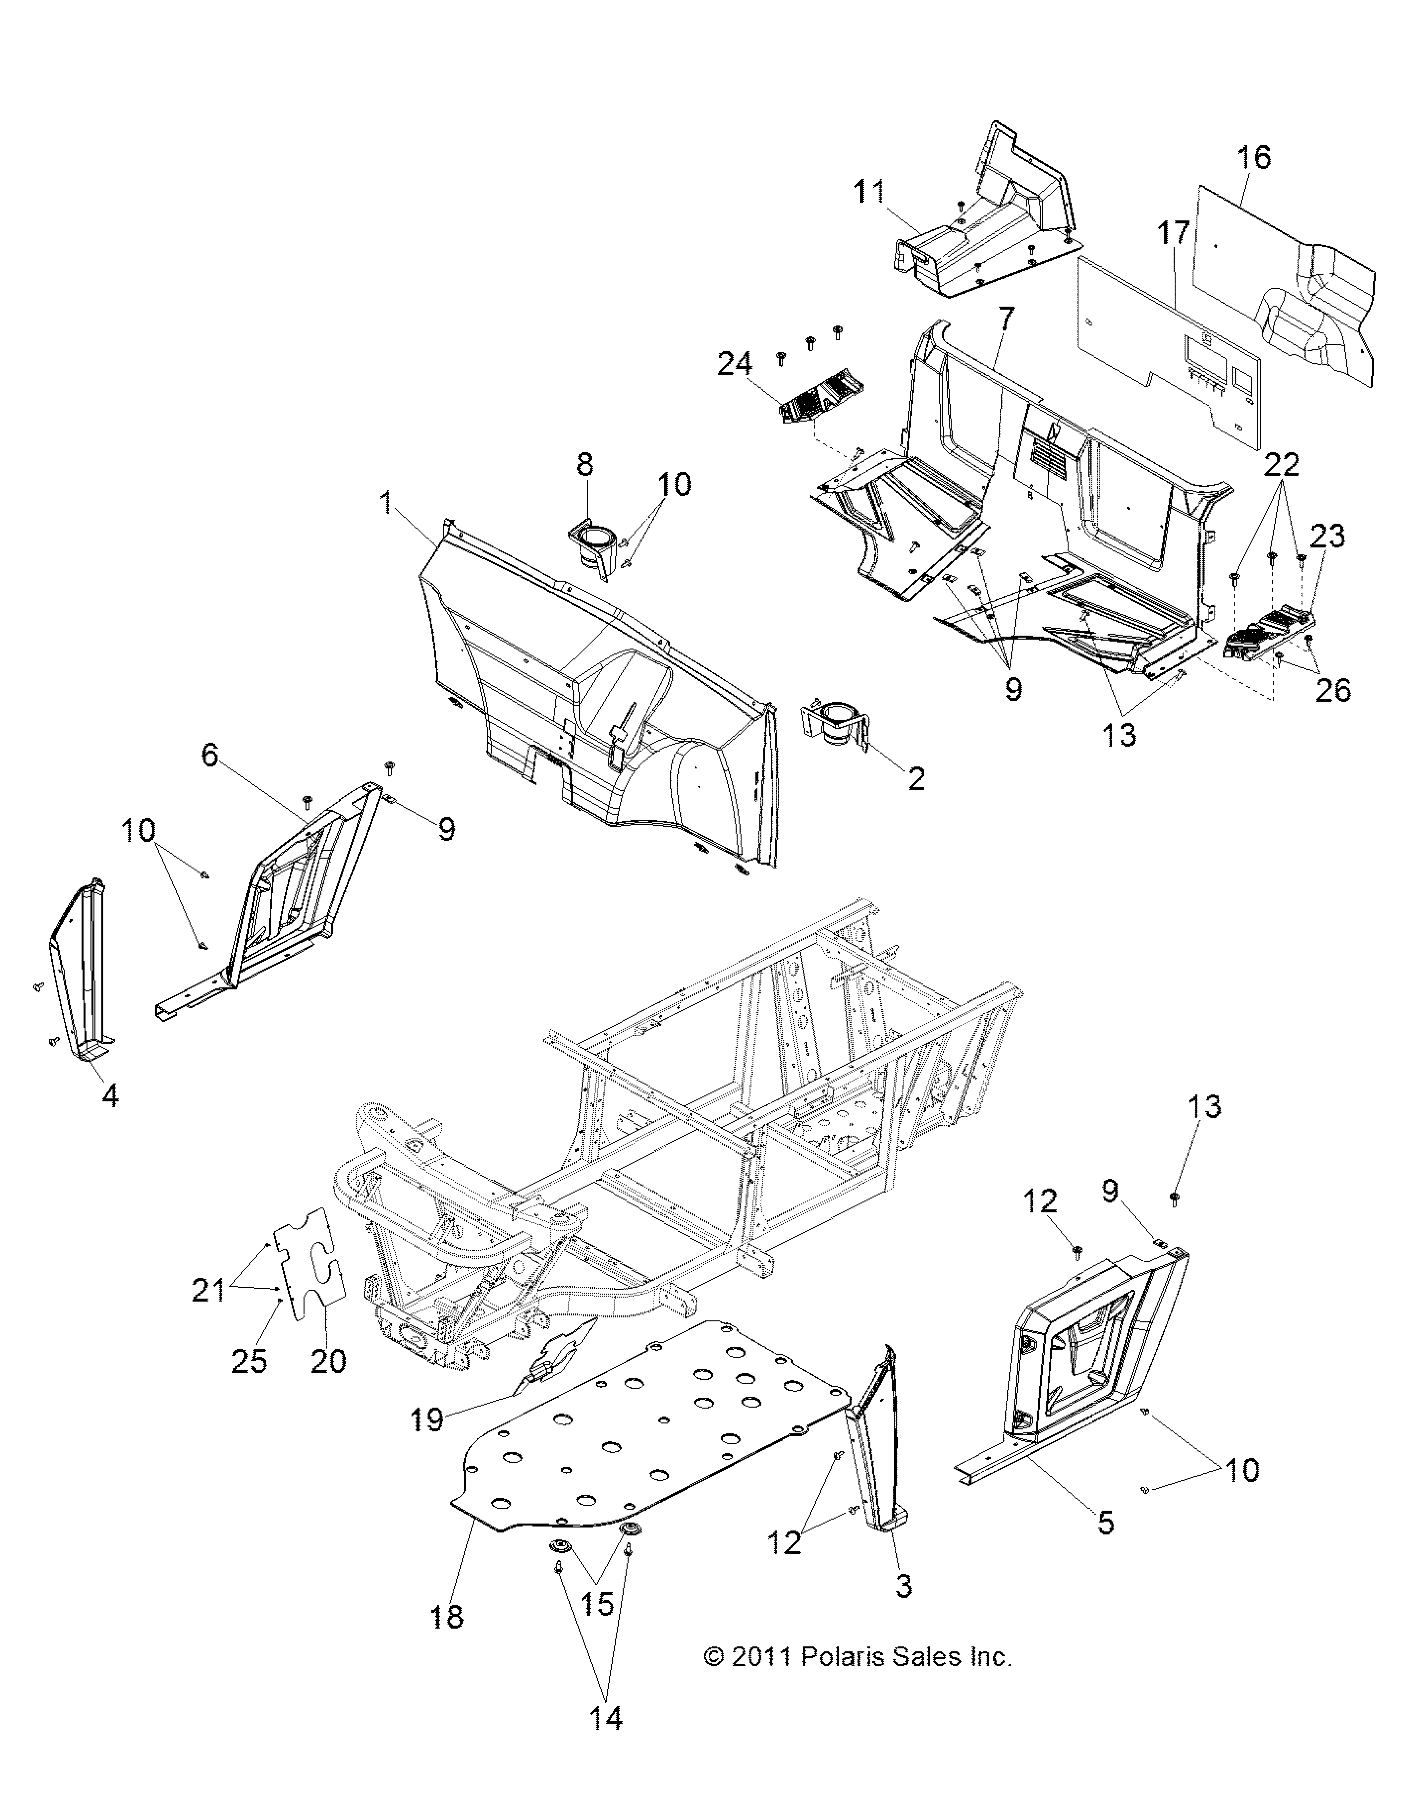 Part Number : 5439817 COVER-DRIVE SHAFT FLOOR